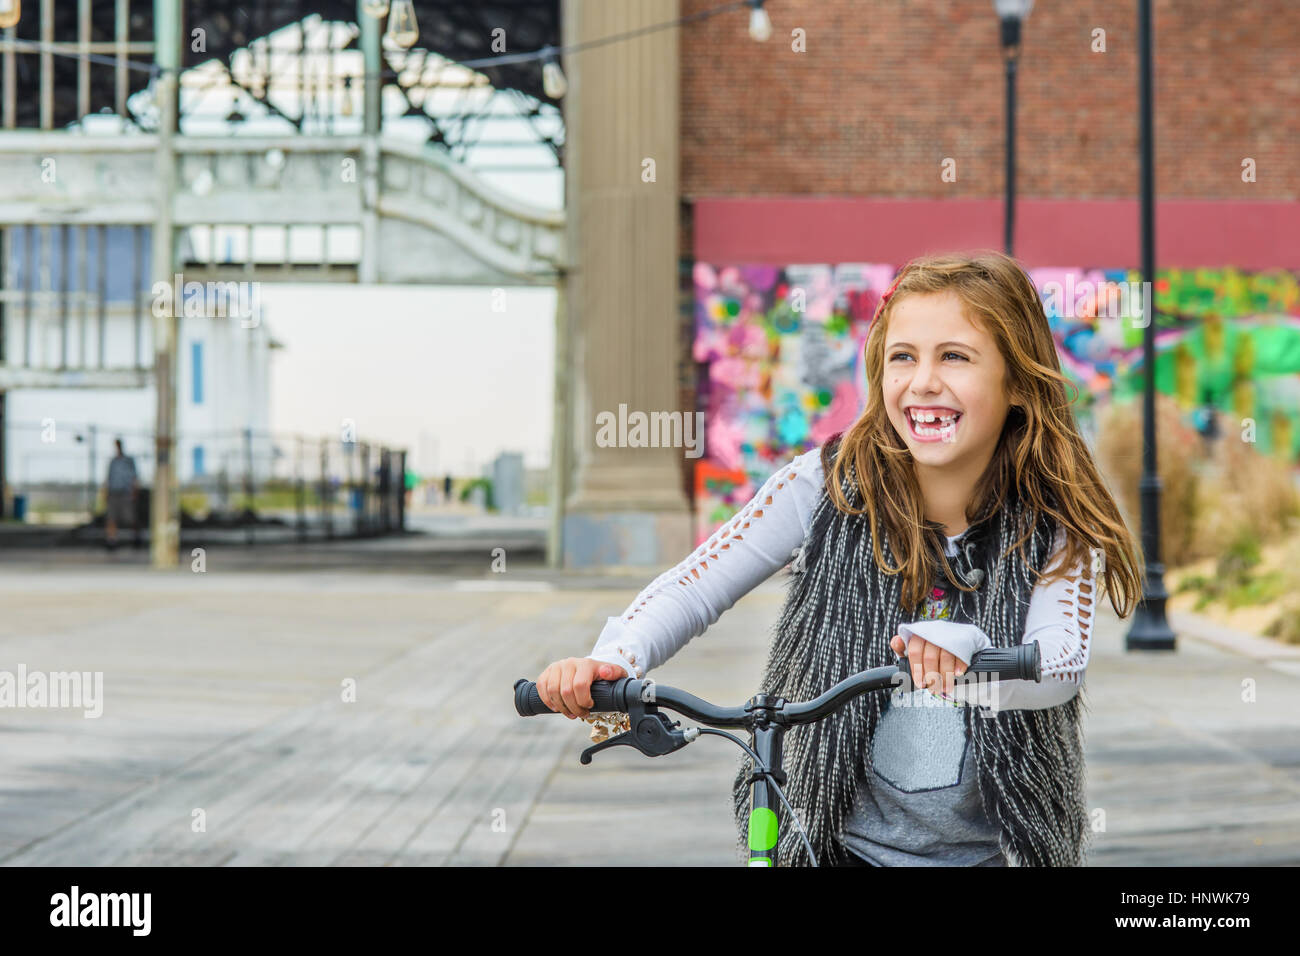 Girl with push scooter in urban setting Stock Photo